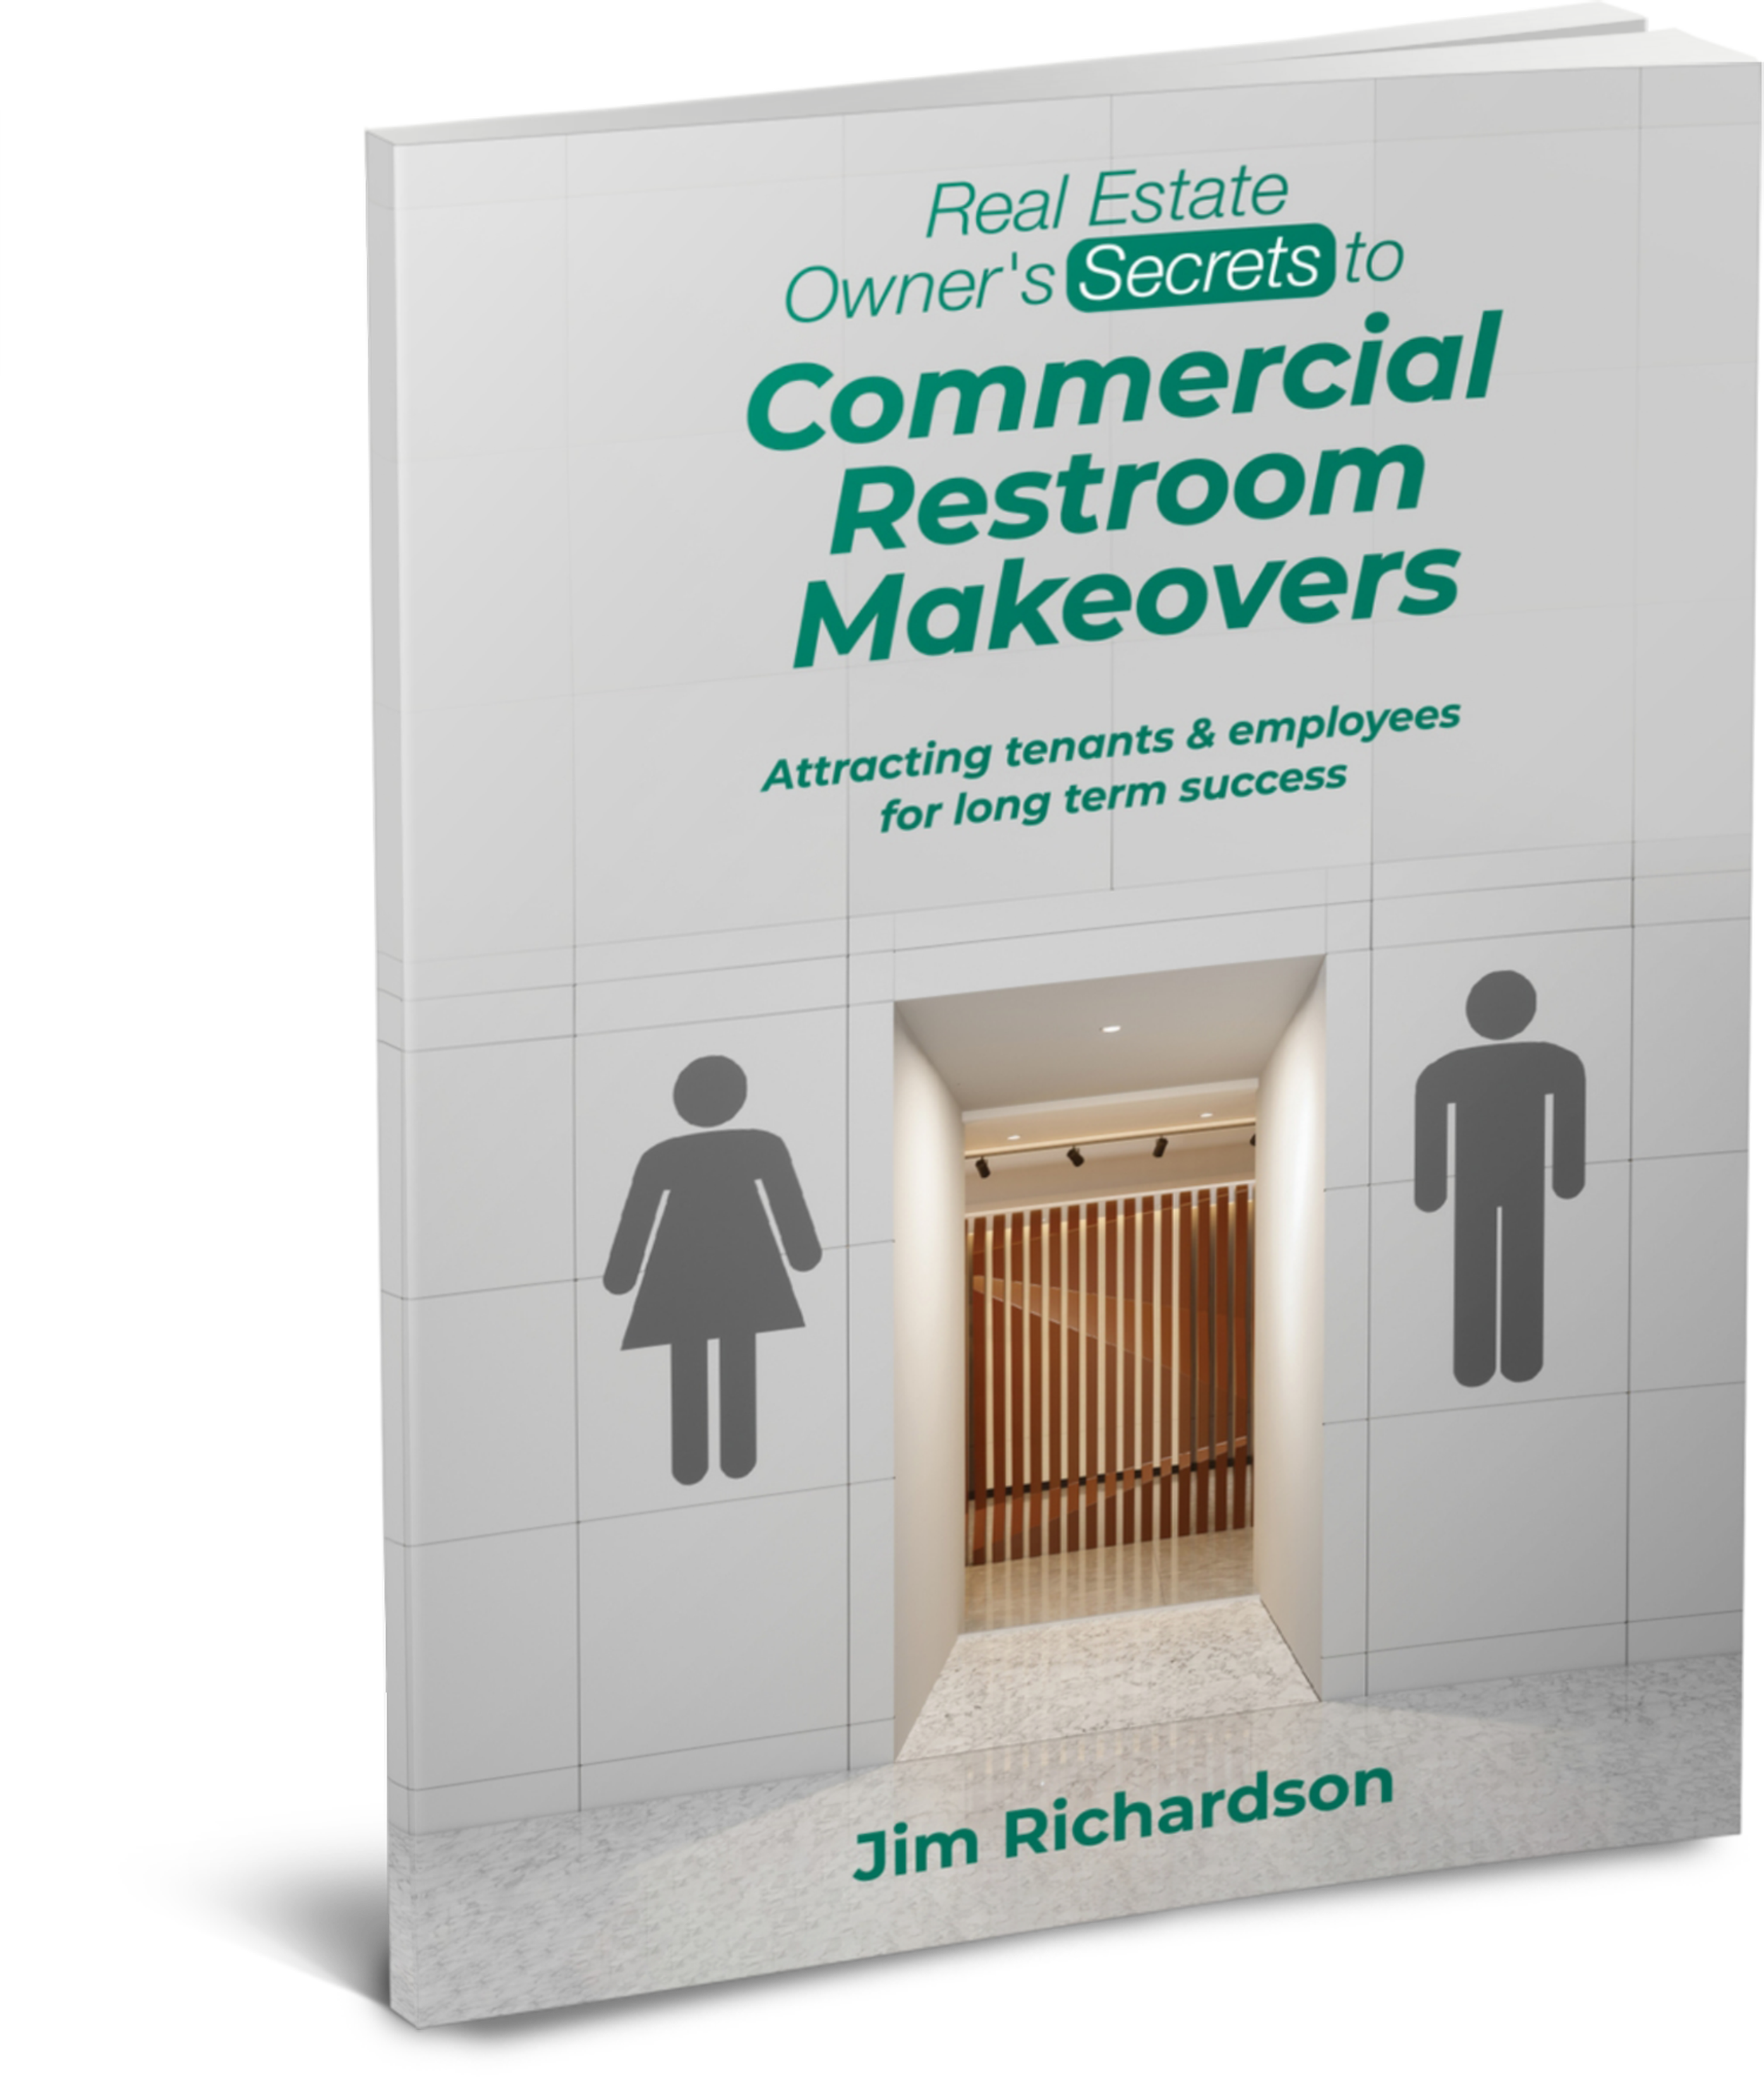  Jim Richardson, who runs MKR Building Solutions, a concierge service for commercial building owners and managers in the Boston area.   Listen as Jim talks about the importance of developing a marketing process that works while he's busy.  